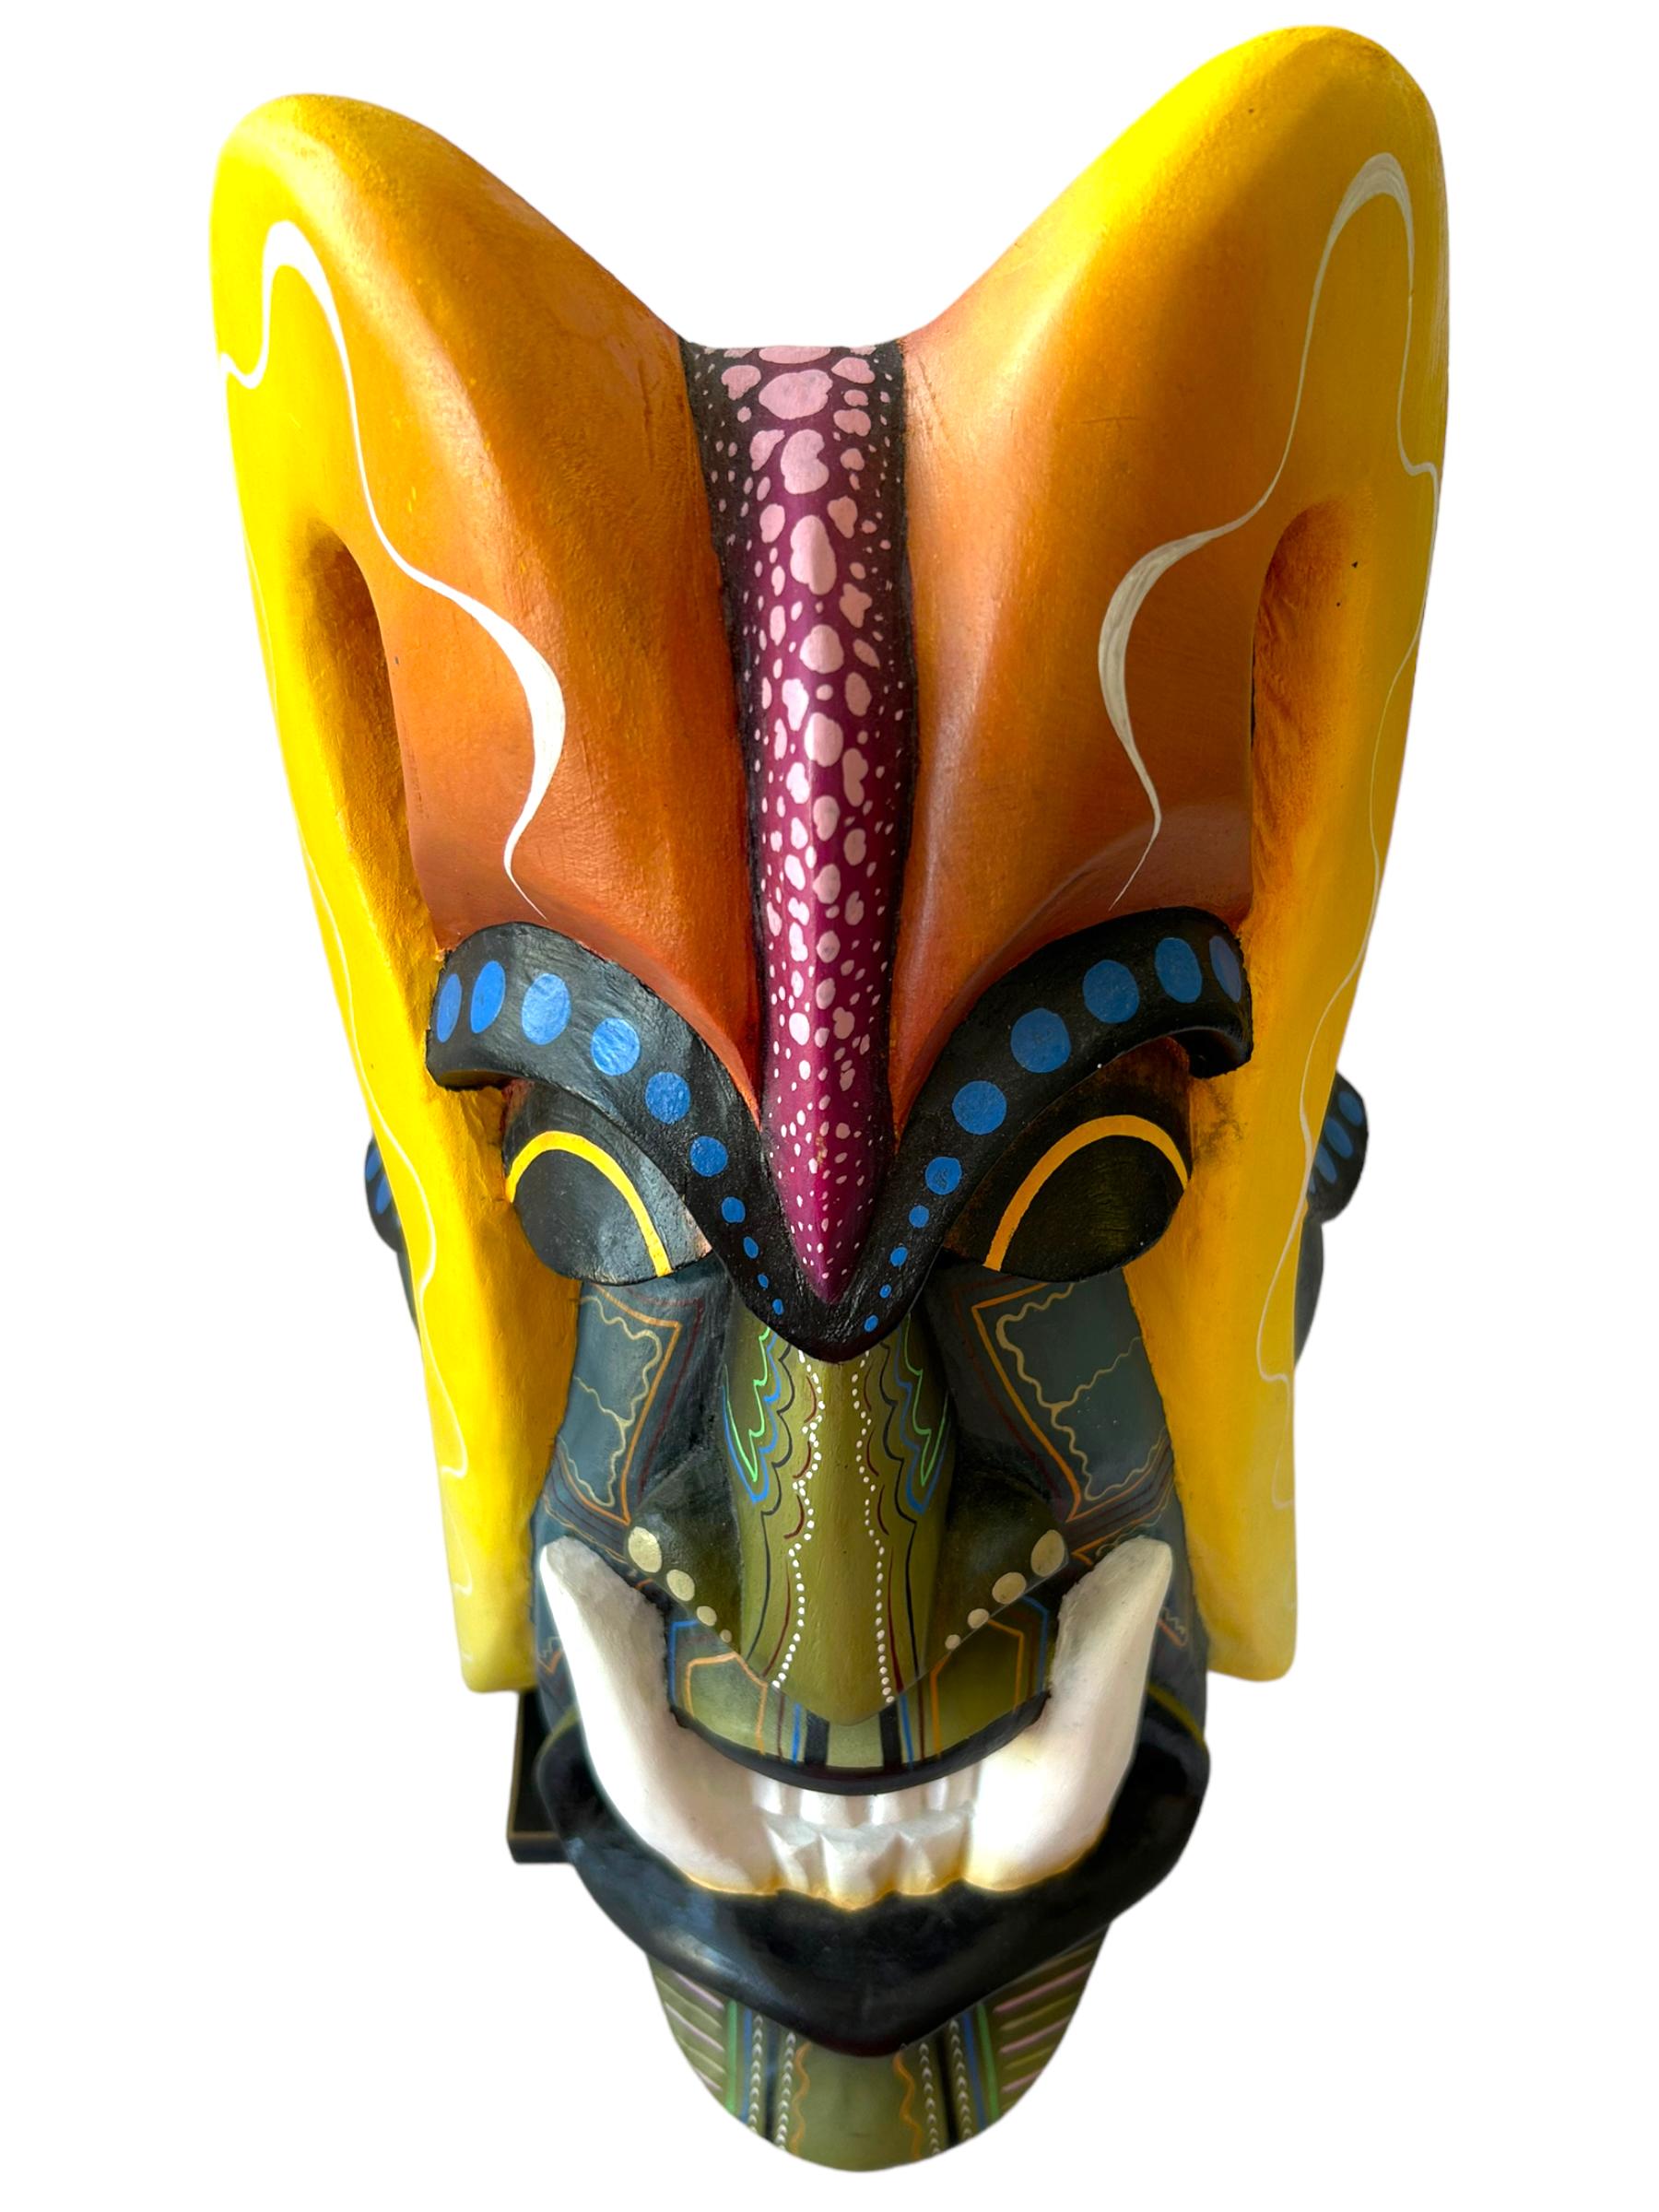 This vintage 2011 Boruca mask is a truly unique piece of art. Handmade by indigenous artisans from Costa Rica, this wooden mask is a beautiful representation of Latin American culture. The intricate design and attention to detail make this mask a